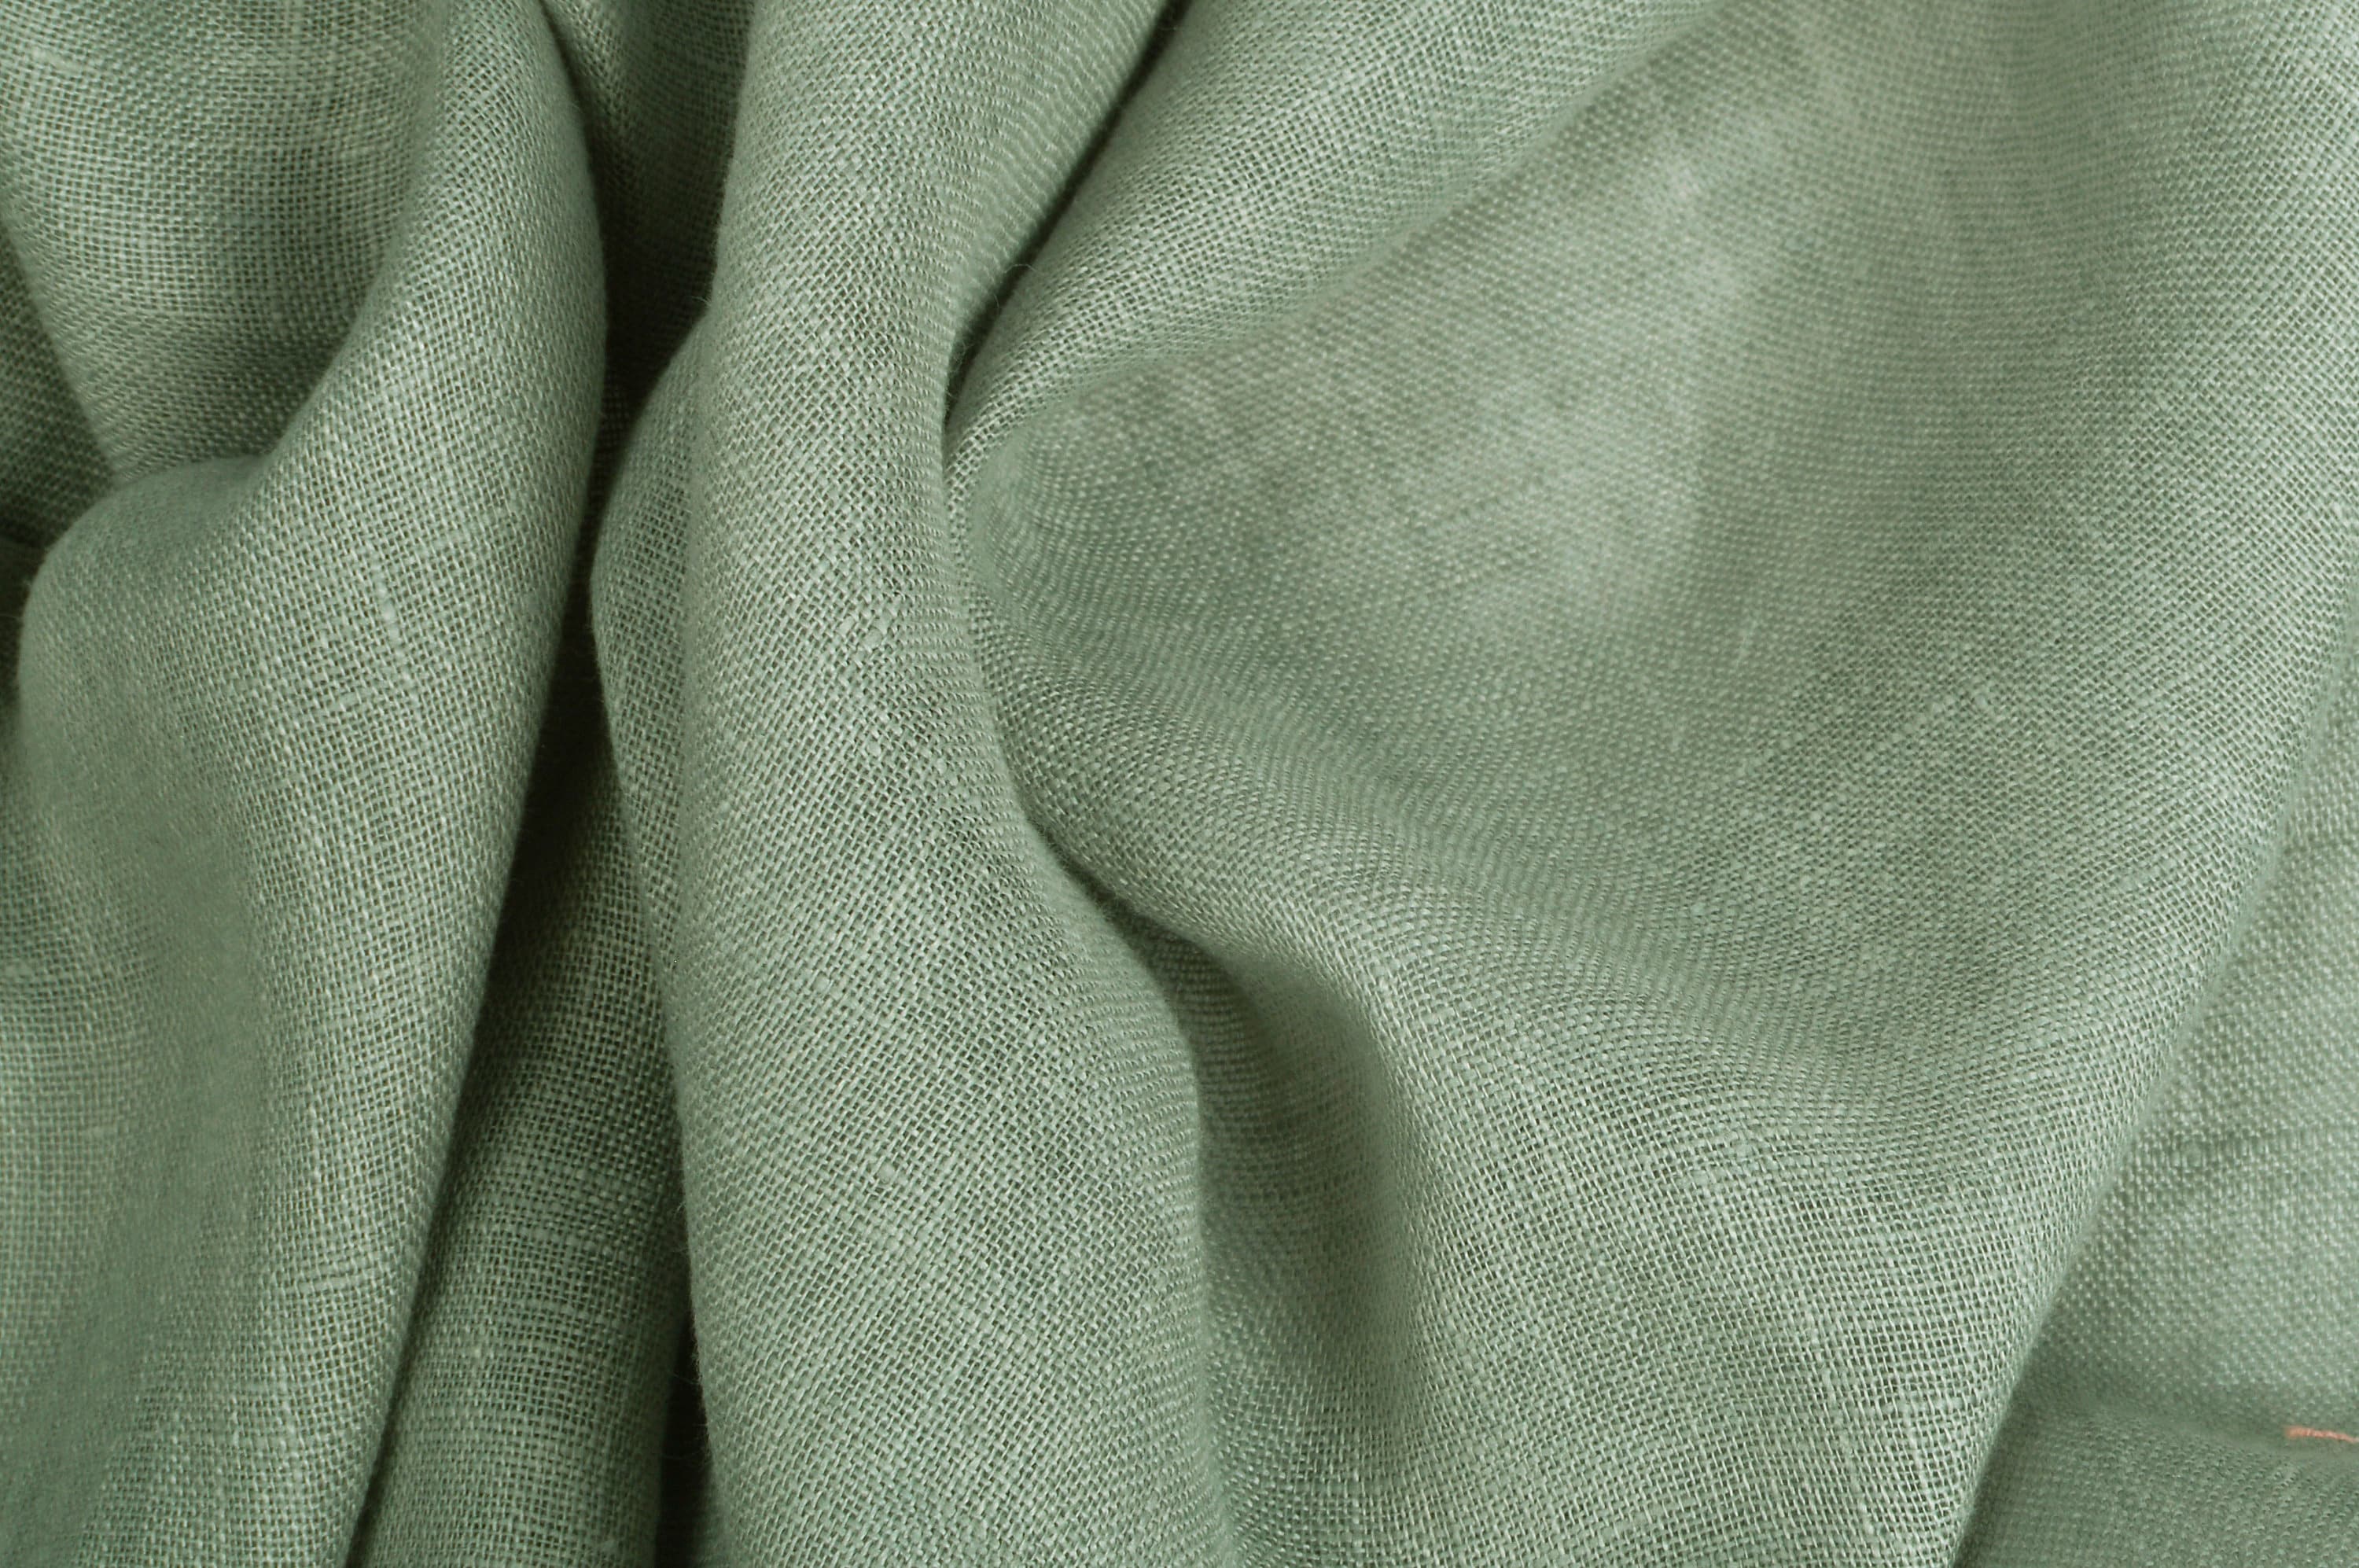 Softened thin linen fabric, 95 GSM, washed pure linen, pale green linen,  semi sheer linen. Linen fabric by the meter, linen by the yard